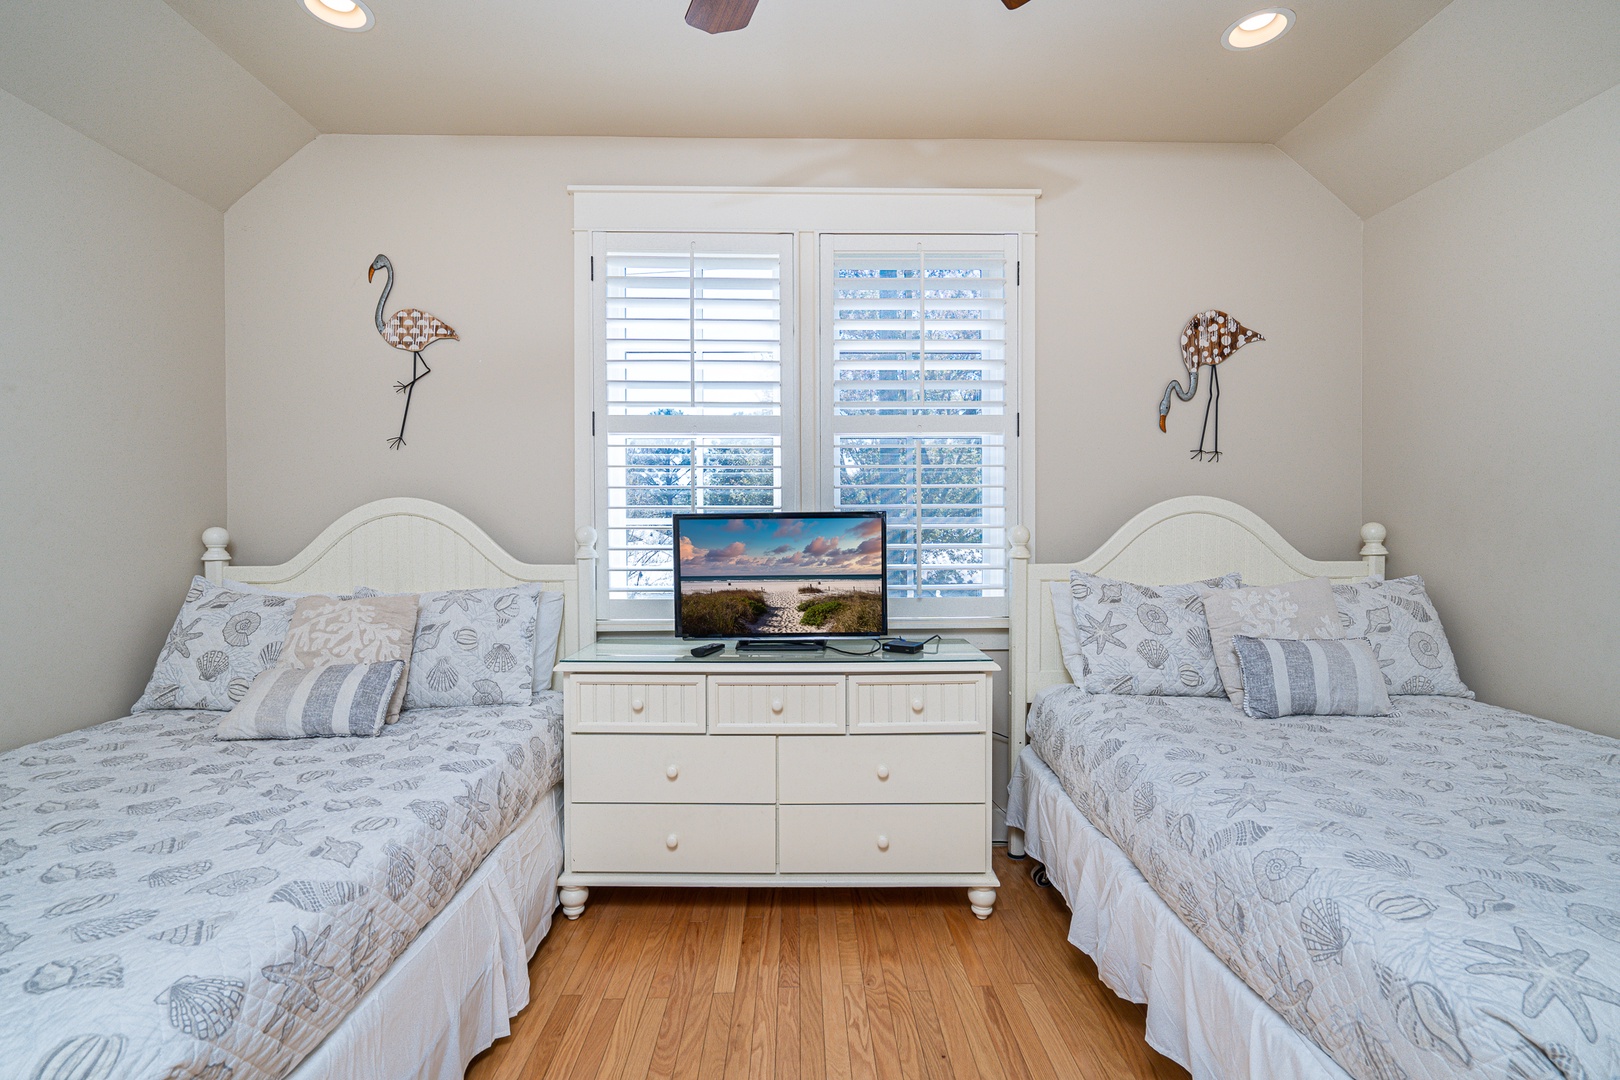 This 2nd-floor bedroom features 2 full beds, 1 twin bed, & a private ensuite.